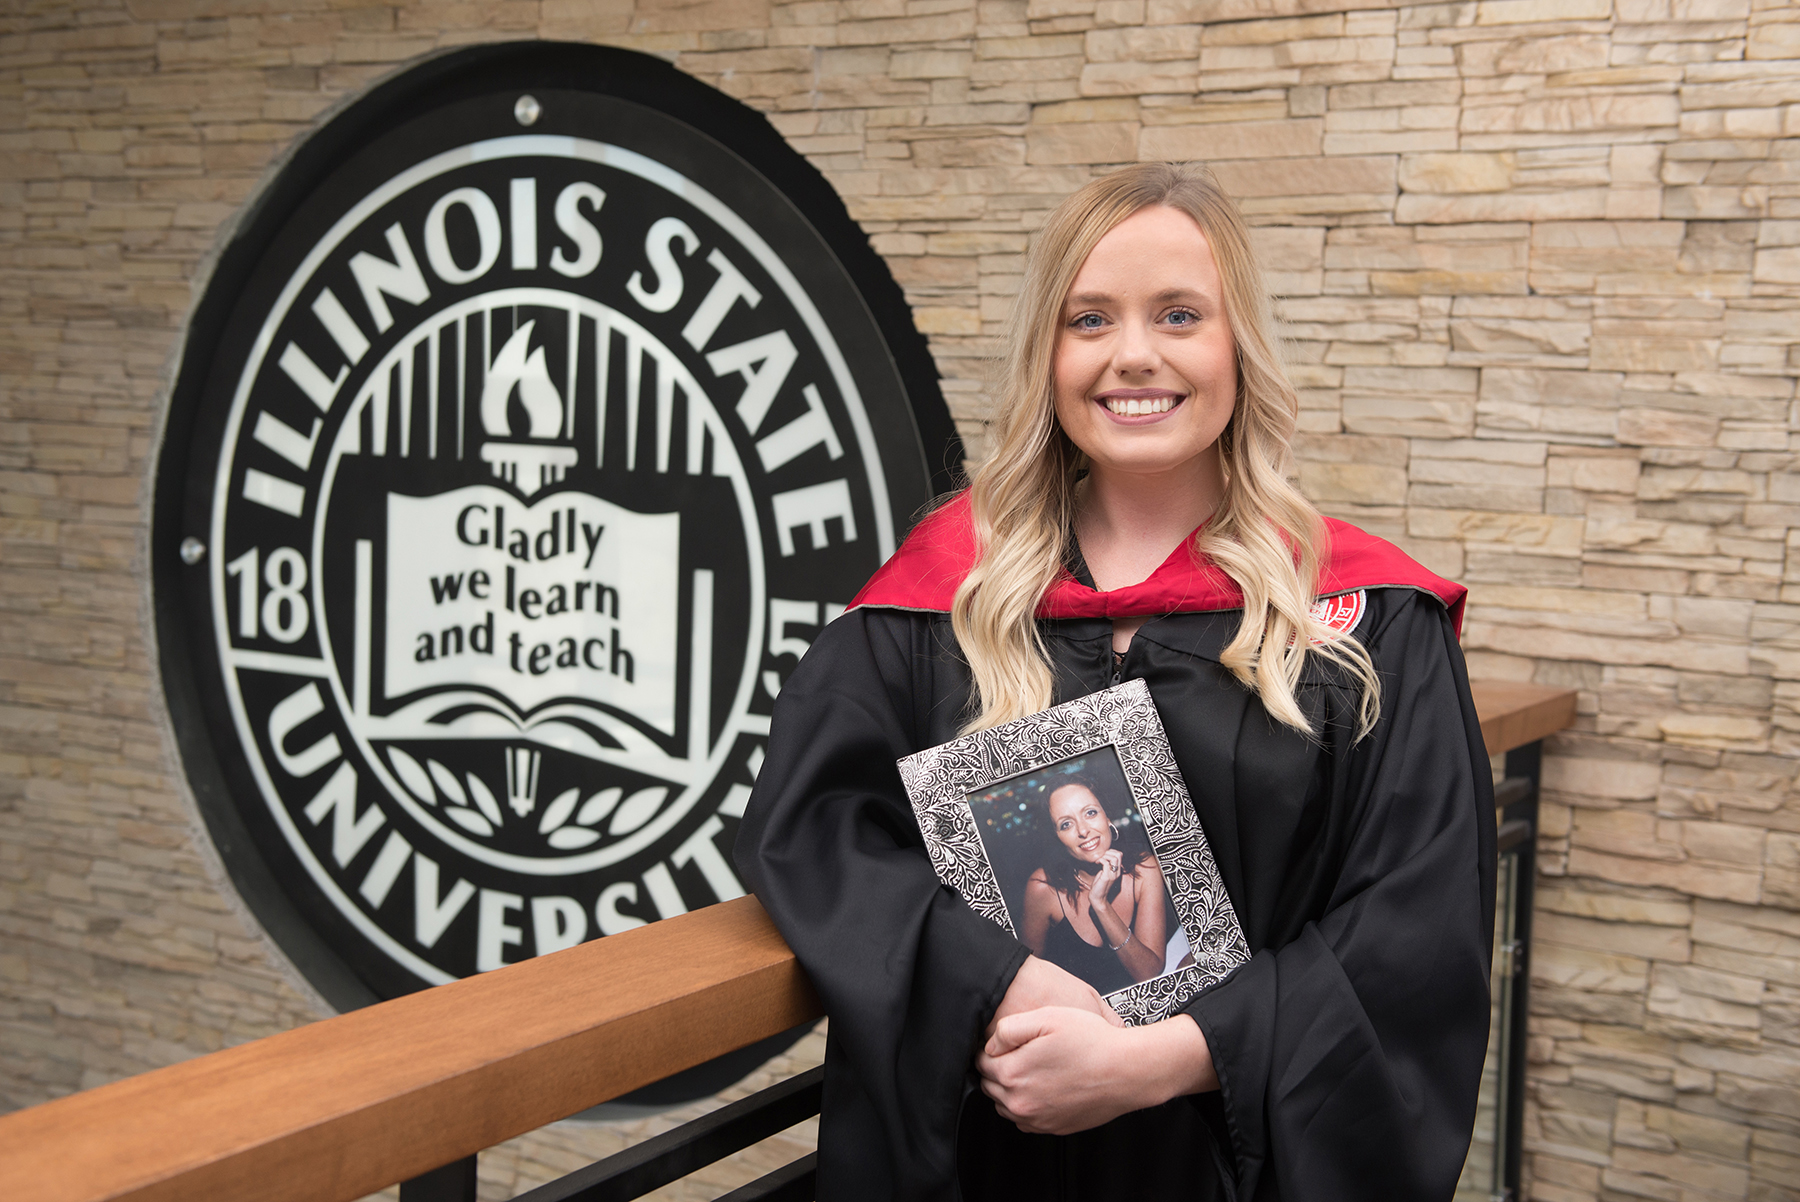 When Elizabeth Rice graduates with her master’s in speech-language pathology May 10, she will be remembering her mother, Melissa Rice, who died in 2013.